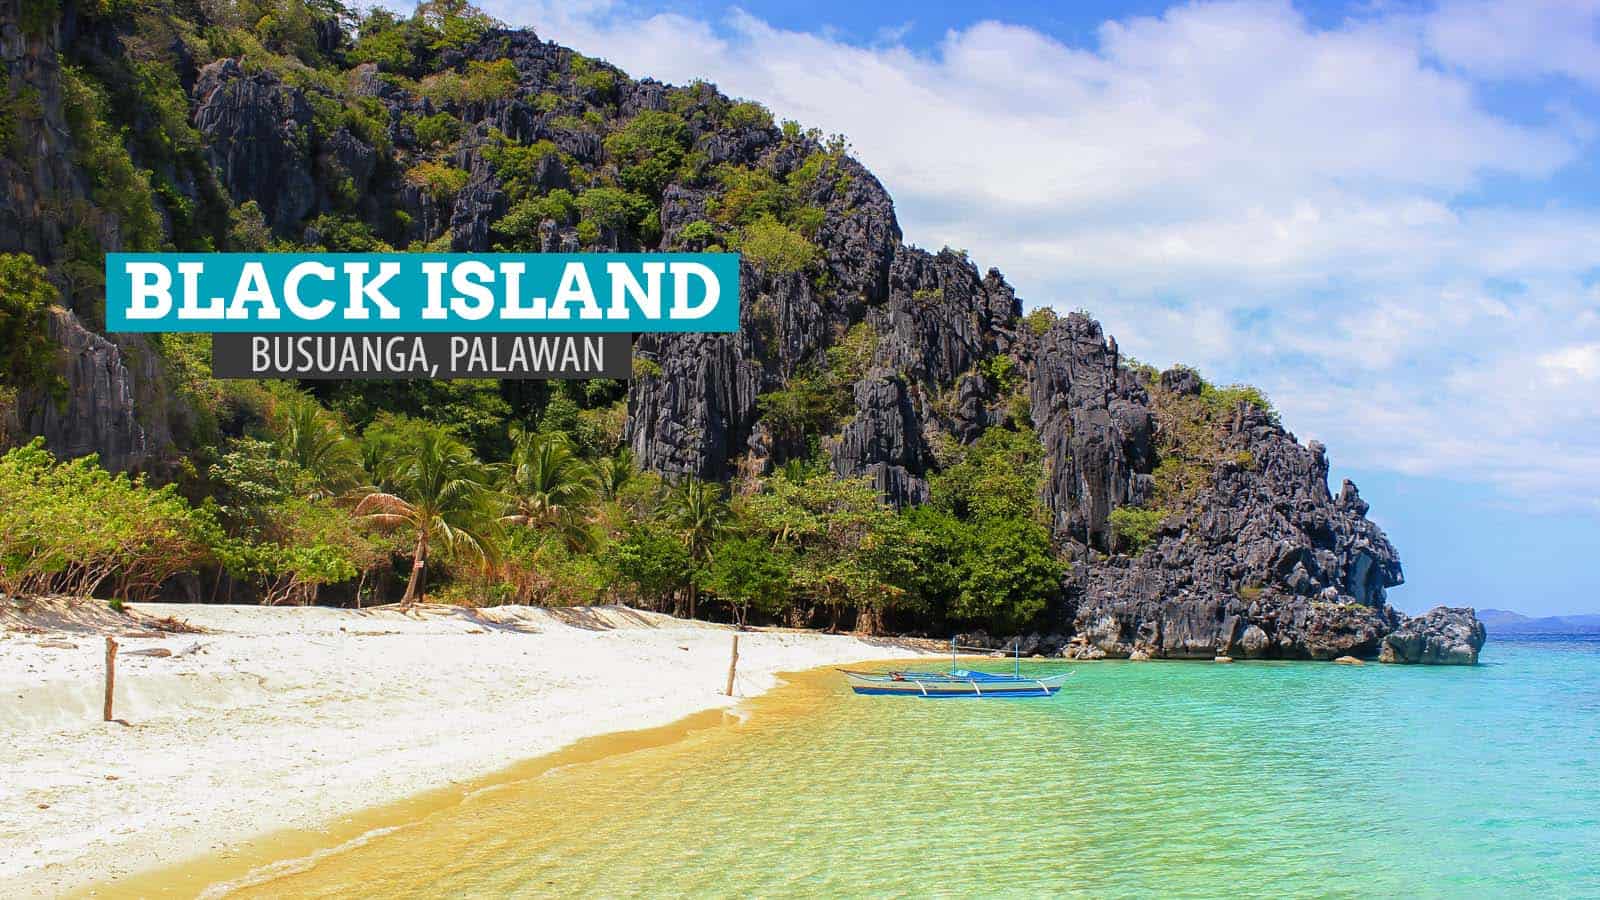 Black Island, Busuanga: The New Shade of Paradise in Palawan, Philippines